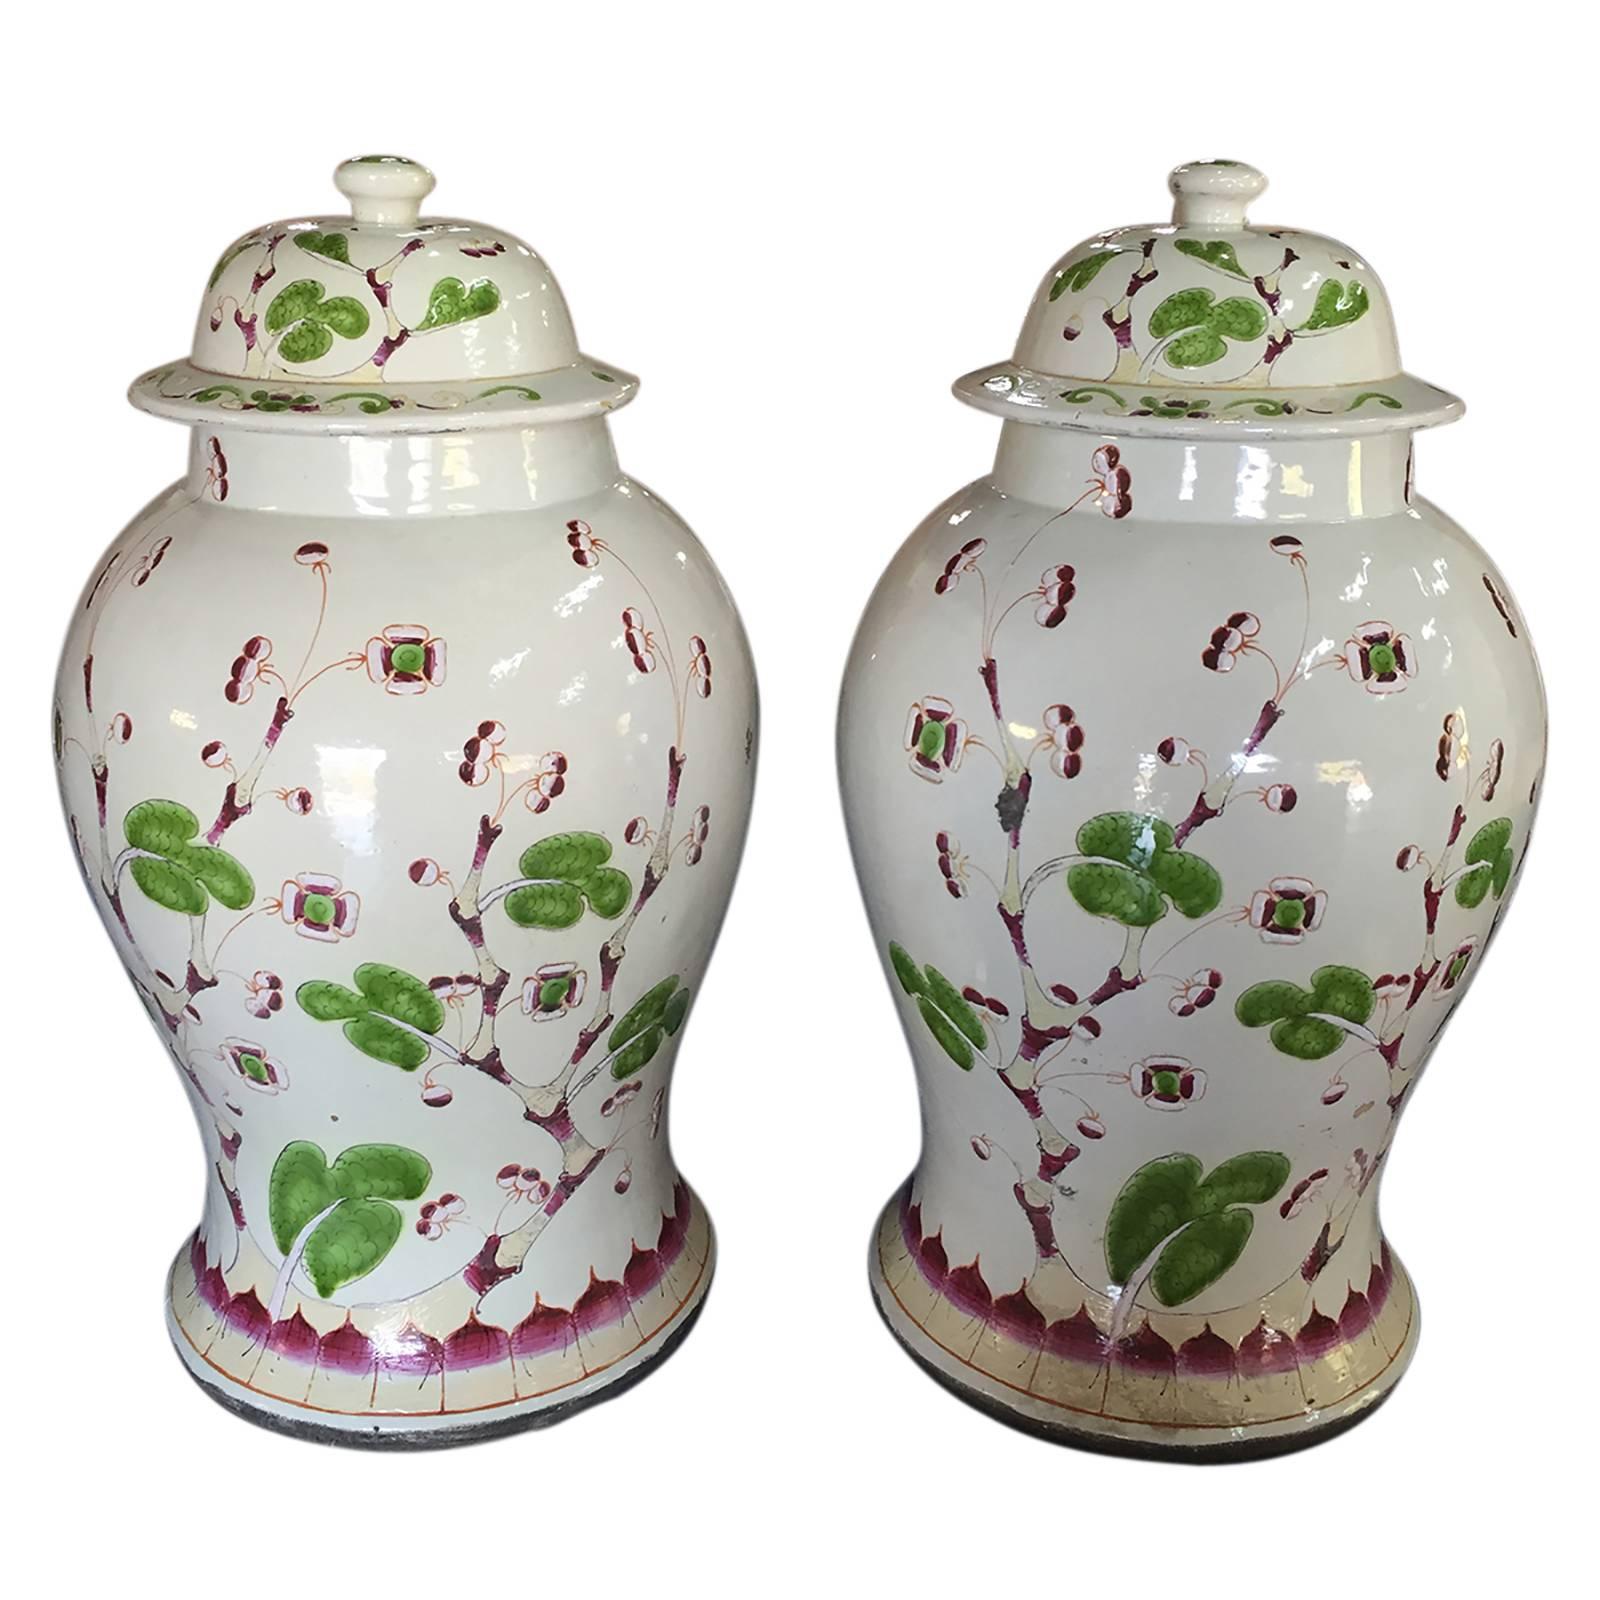 19th to 20th Century Large Covered Jars in the Style of Samson﻿